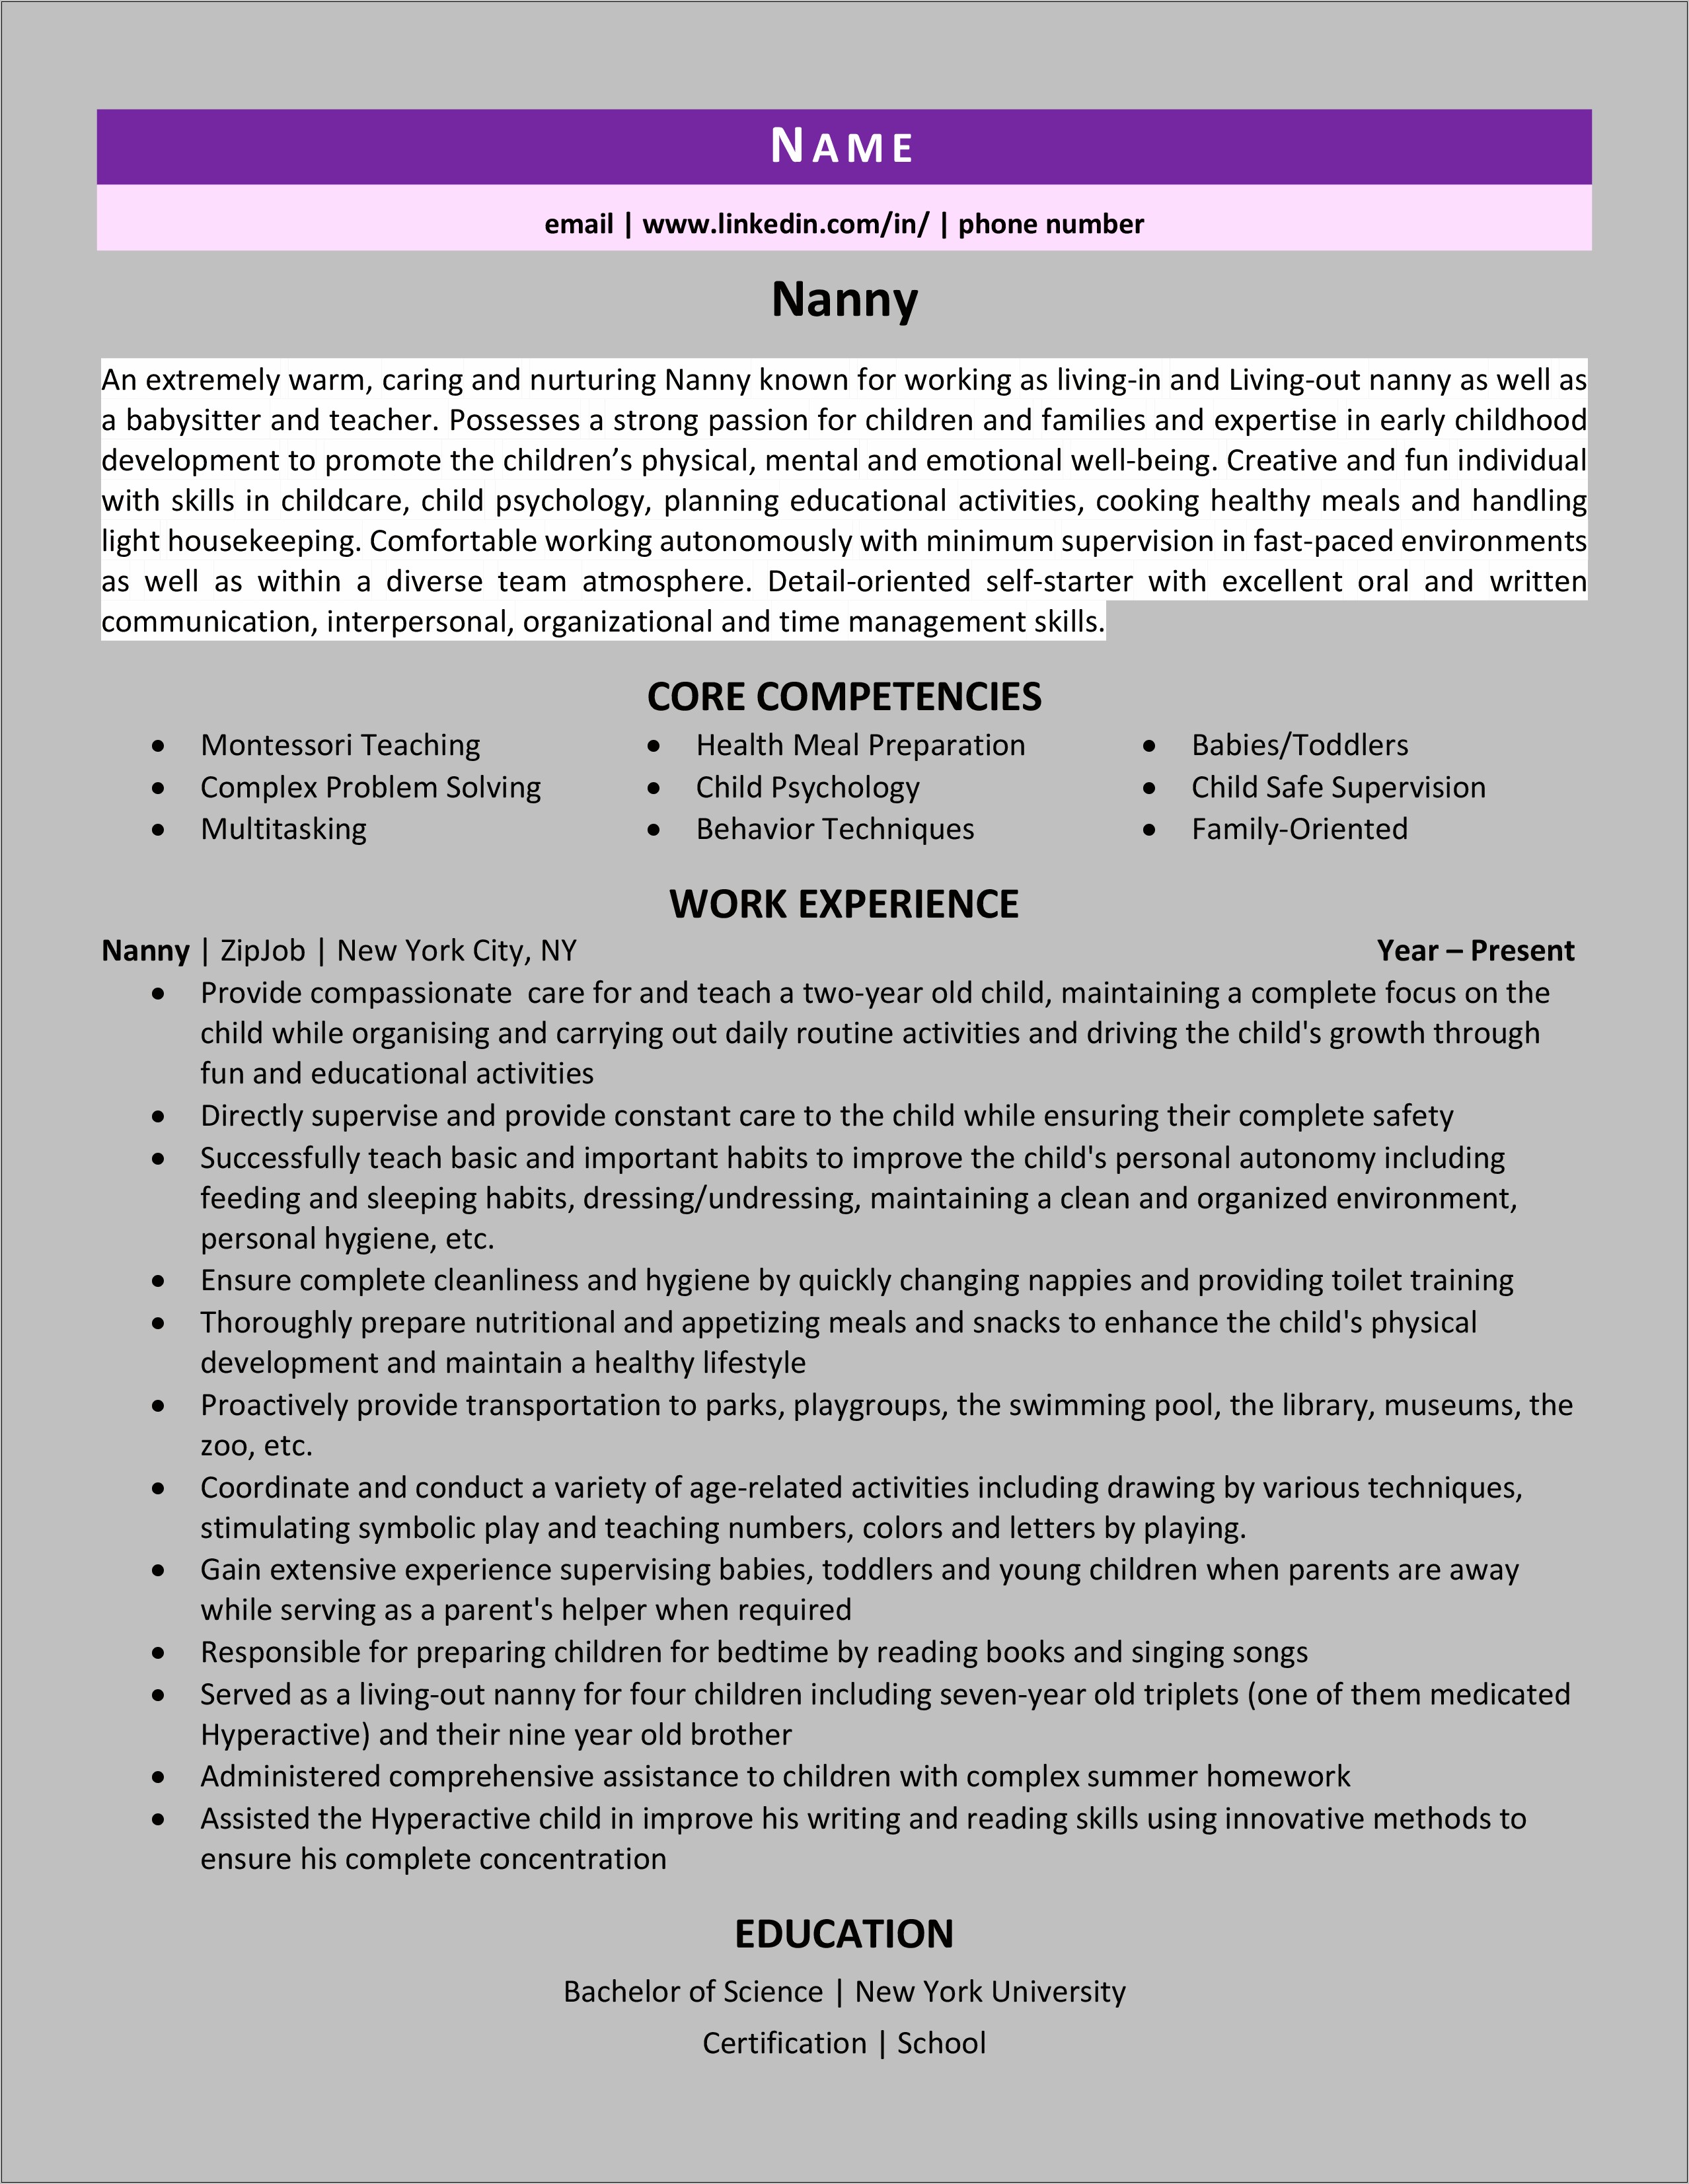 Skills As A Nanny In Resume